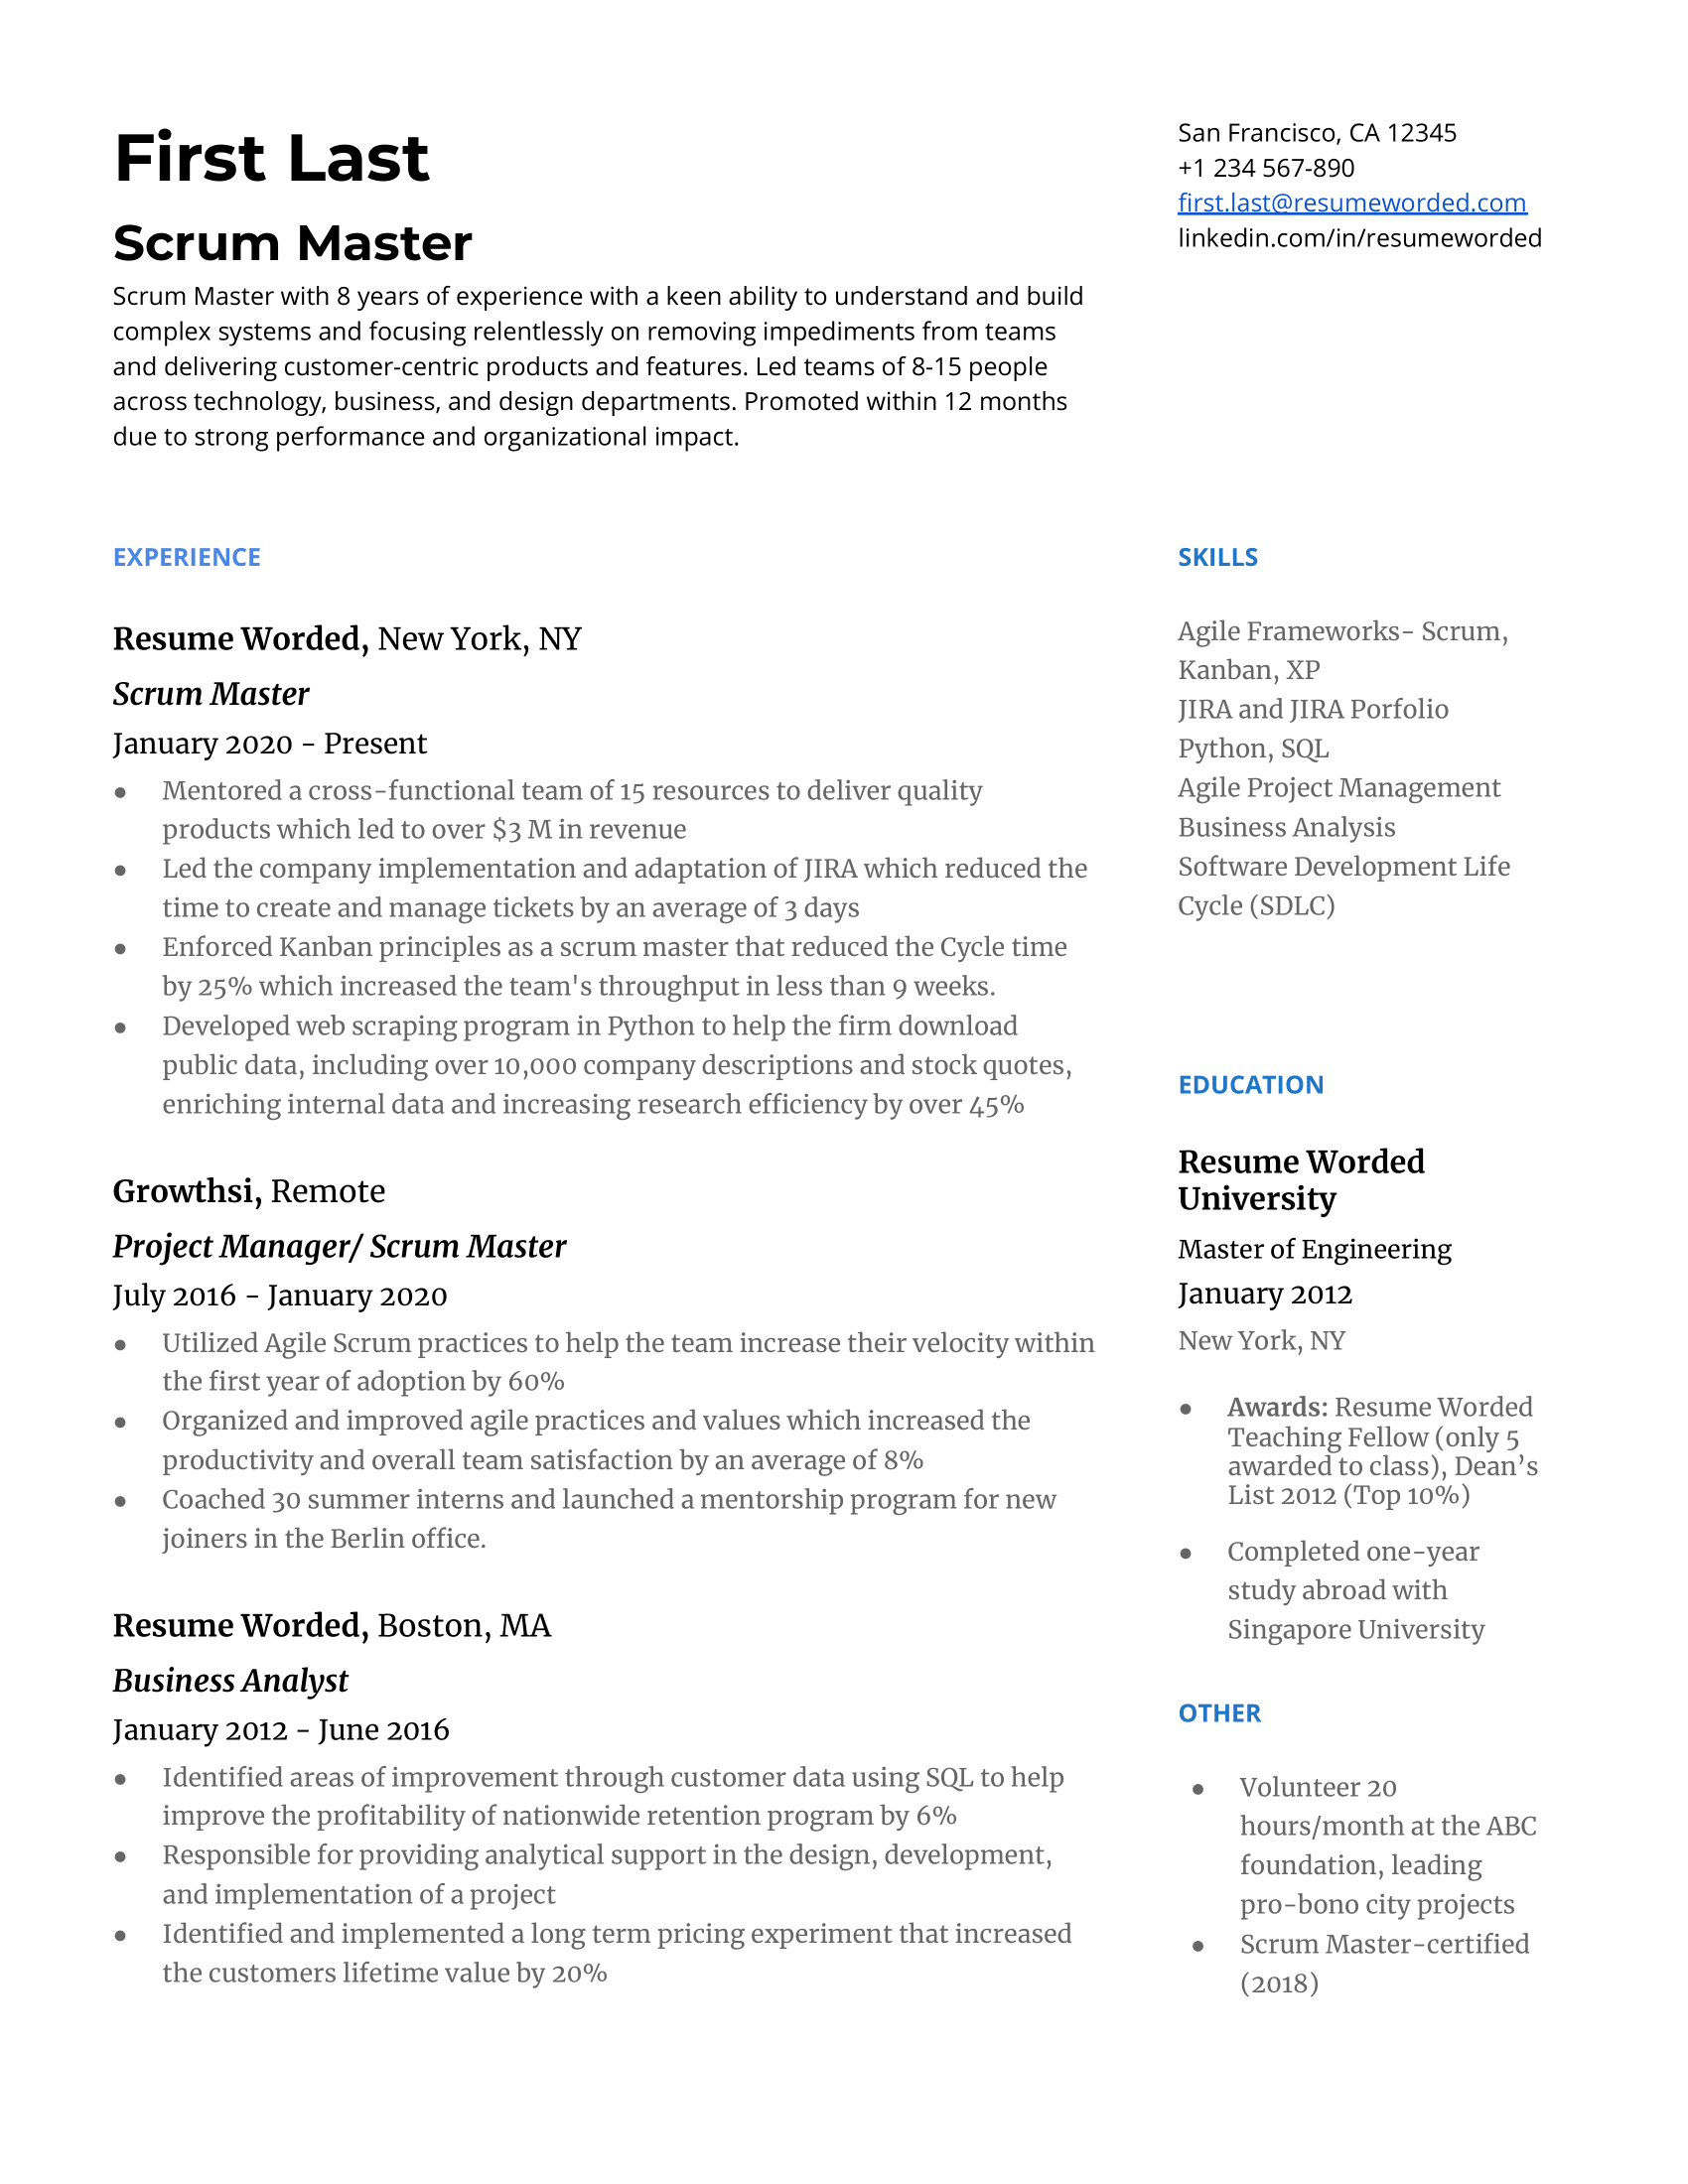 A scrum master resume template with a summary, a focus on experience in past roles, related skills, education, and certificate. 